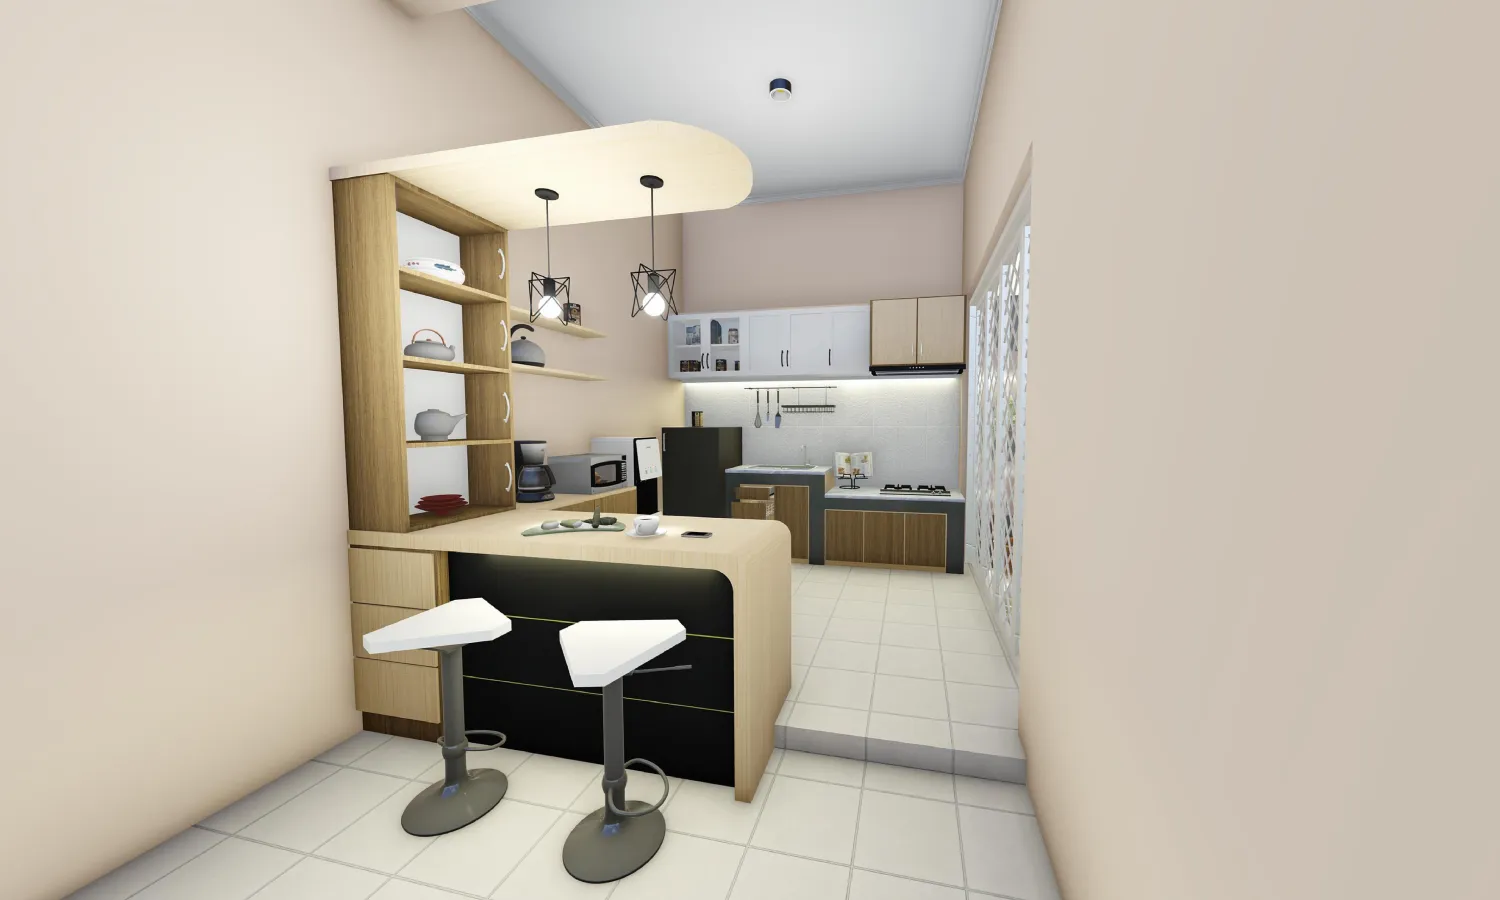 price Home/Office/Shop/Cafe Interior Design for 1-3 Rooms